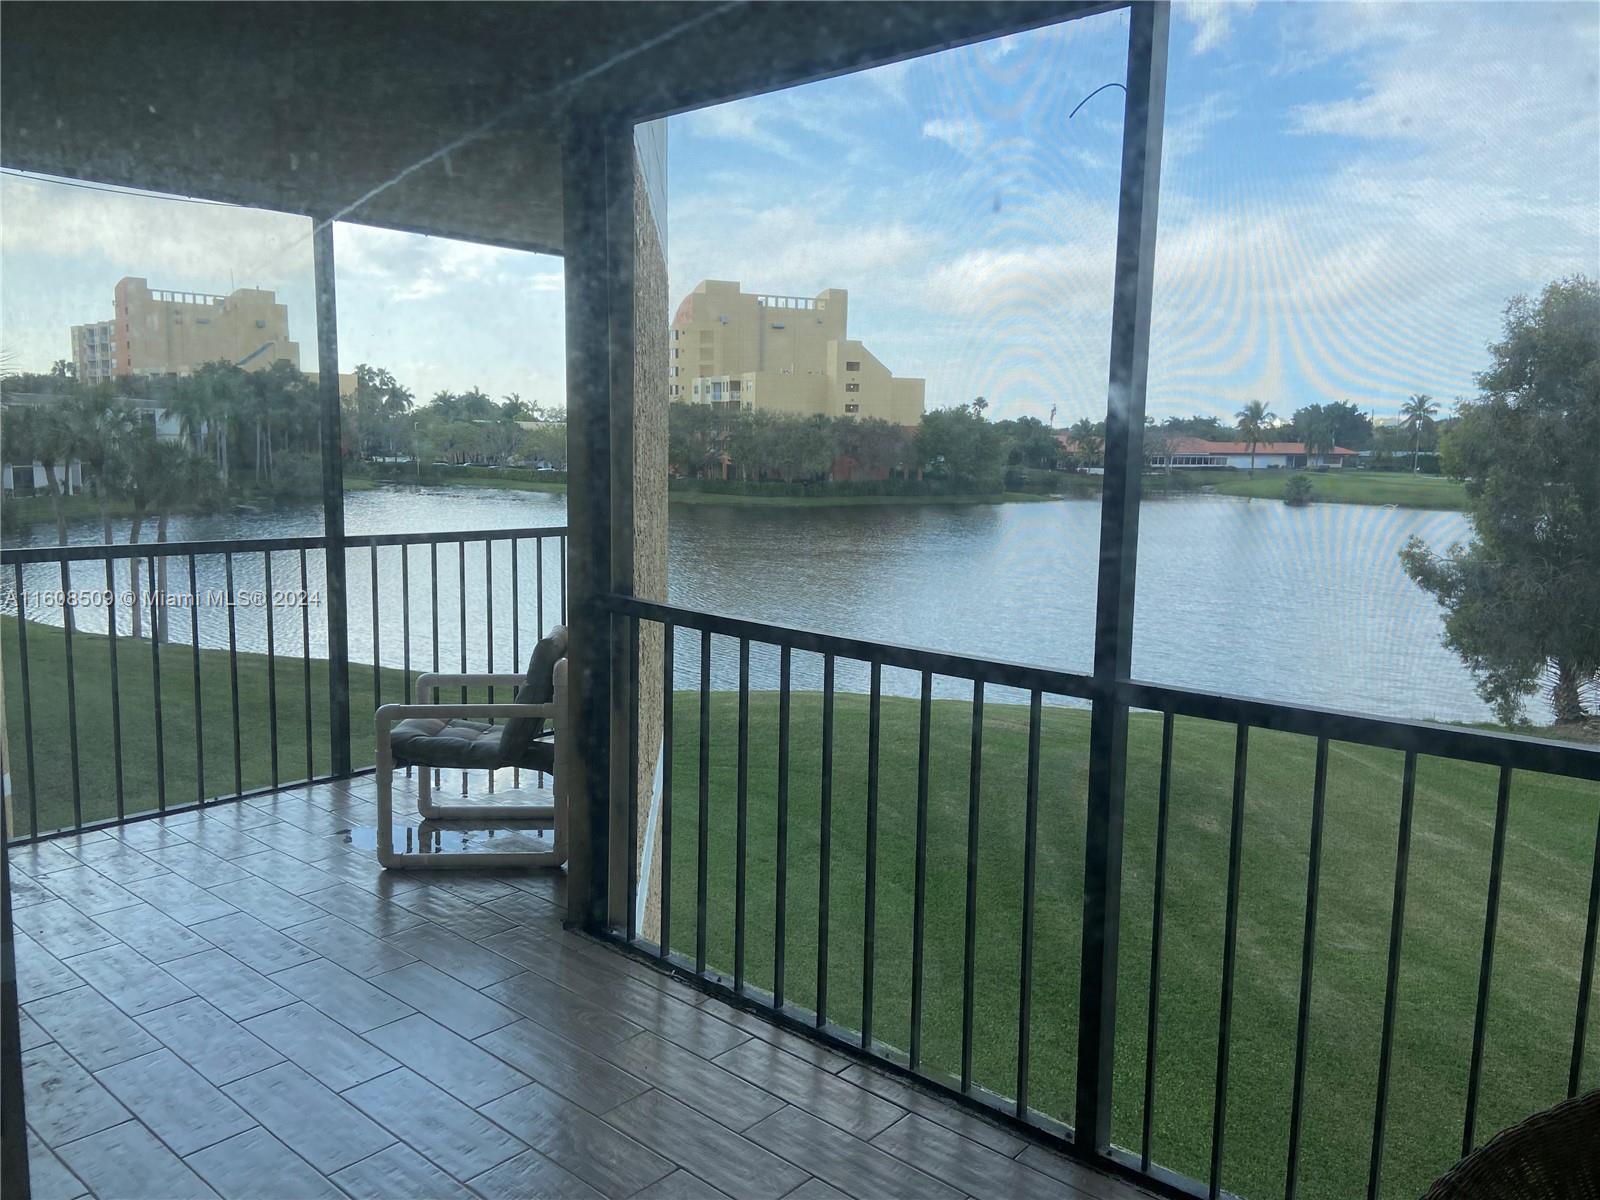 AWESOME LOCATION IN COUNTRY CLUB VILLAGES AT WESTON WITH MAGNIFICENT LAKE AND GOLF VIEWS. 2 MASTER BEDROOMS, SPLIT PLAN EACH WITH THEIR OWN FULL UPDATED BATH, AND HALF BATH FOR GUESTS. COMPLETELY REMODELED, UNIT HAS HAD VERY LIMITED USE, NEWER AC, NEWER APPLIANCES, NEWER COMPLETE REMODEL BOTH KITCHEN AND BATHS.  LARGE ENCLOSED BALCONY READY FOR NEW OWNER TO RELAX WITH COFFEE TO ABSORB BEAUTIFUL UNIQUE LARGE RANGE VIEWS. LARGE KITCHEN WITH EAT IN.  FULL SIZE WASHER AND DRYER INSIDE UNIT.  NO NEIGHBORS ABOVE.  COMMUNITY HAS PRIVATE POOL AND TENNIS COURTS. MEMBERSHIP TO THE BONAVENTURE TOWN CENTER CLUB IS AMAZING VALUE, IT OFFERS GYM, SAUNA, BASKETBALL,BOWLING, ROLLER-SKATING, BILLIARDS, MOVIES, POOLS, RACQUET BALL, ETC.  WESTON OFFERS A-RATED SCHOOLS. CENTRALLY LOCATED TO SHOPS AND FREEWAYS.